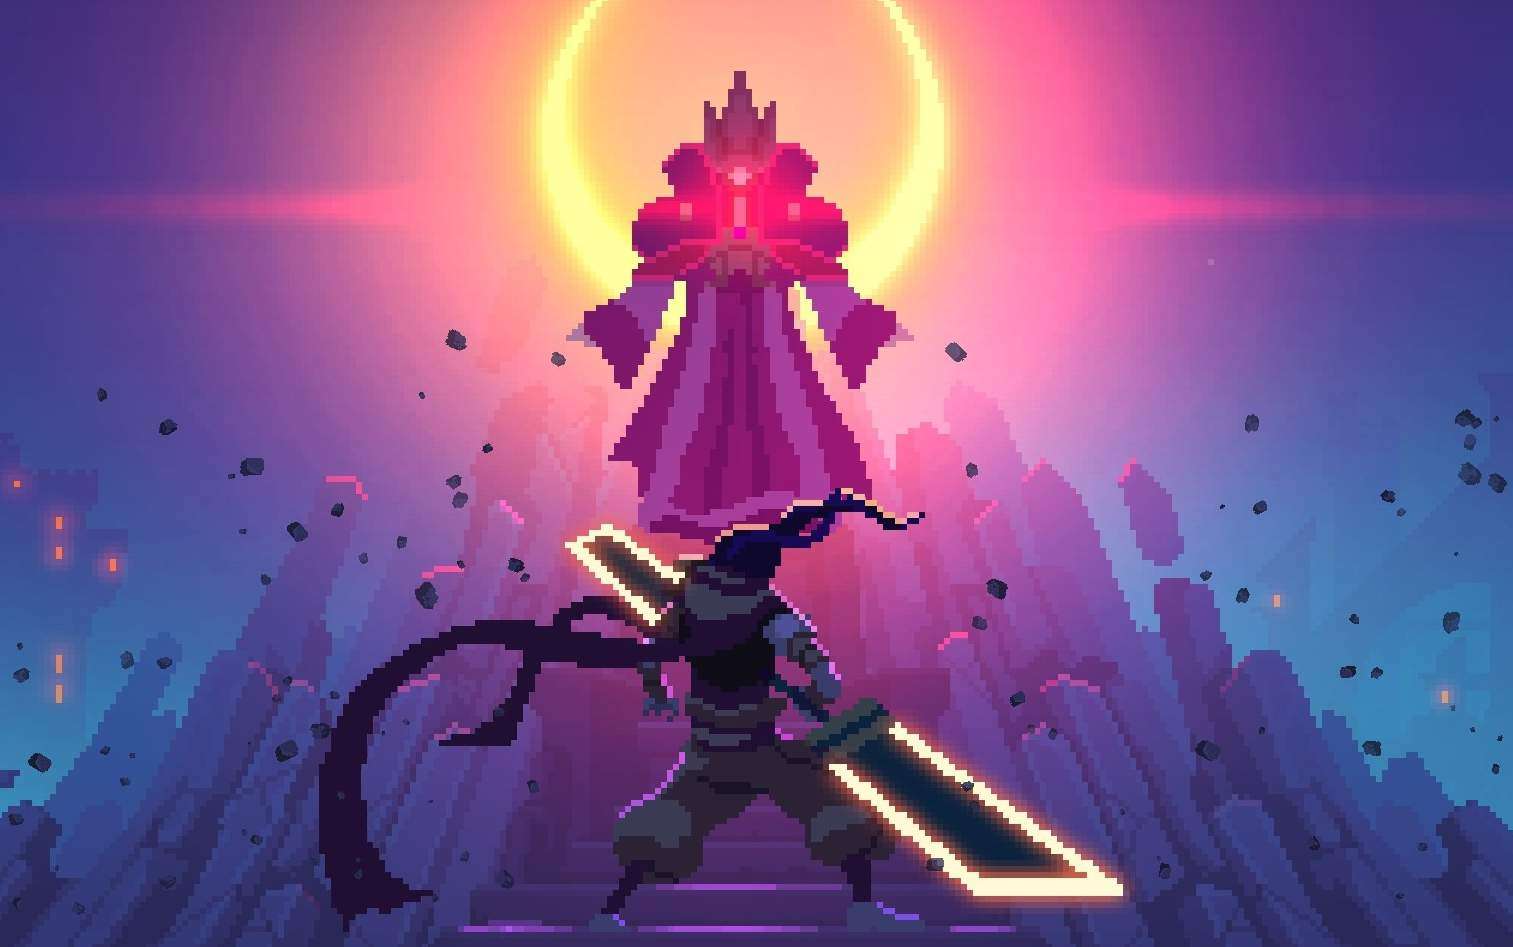 dead cells map keeps scrolling up